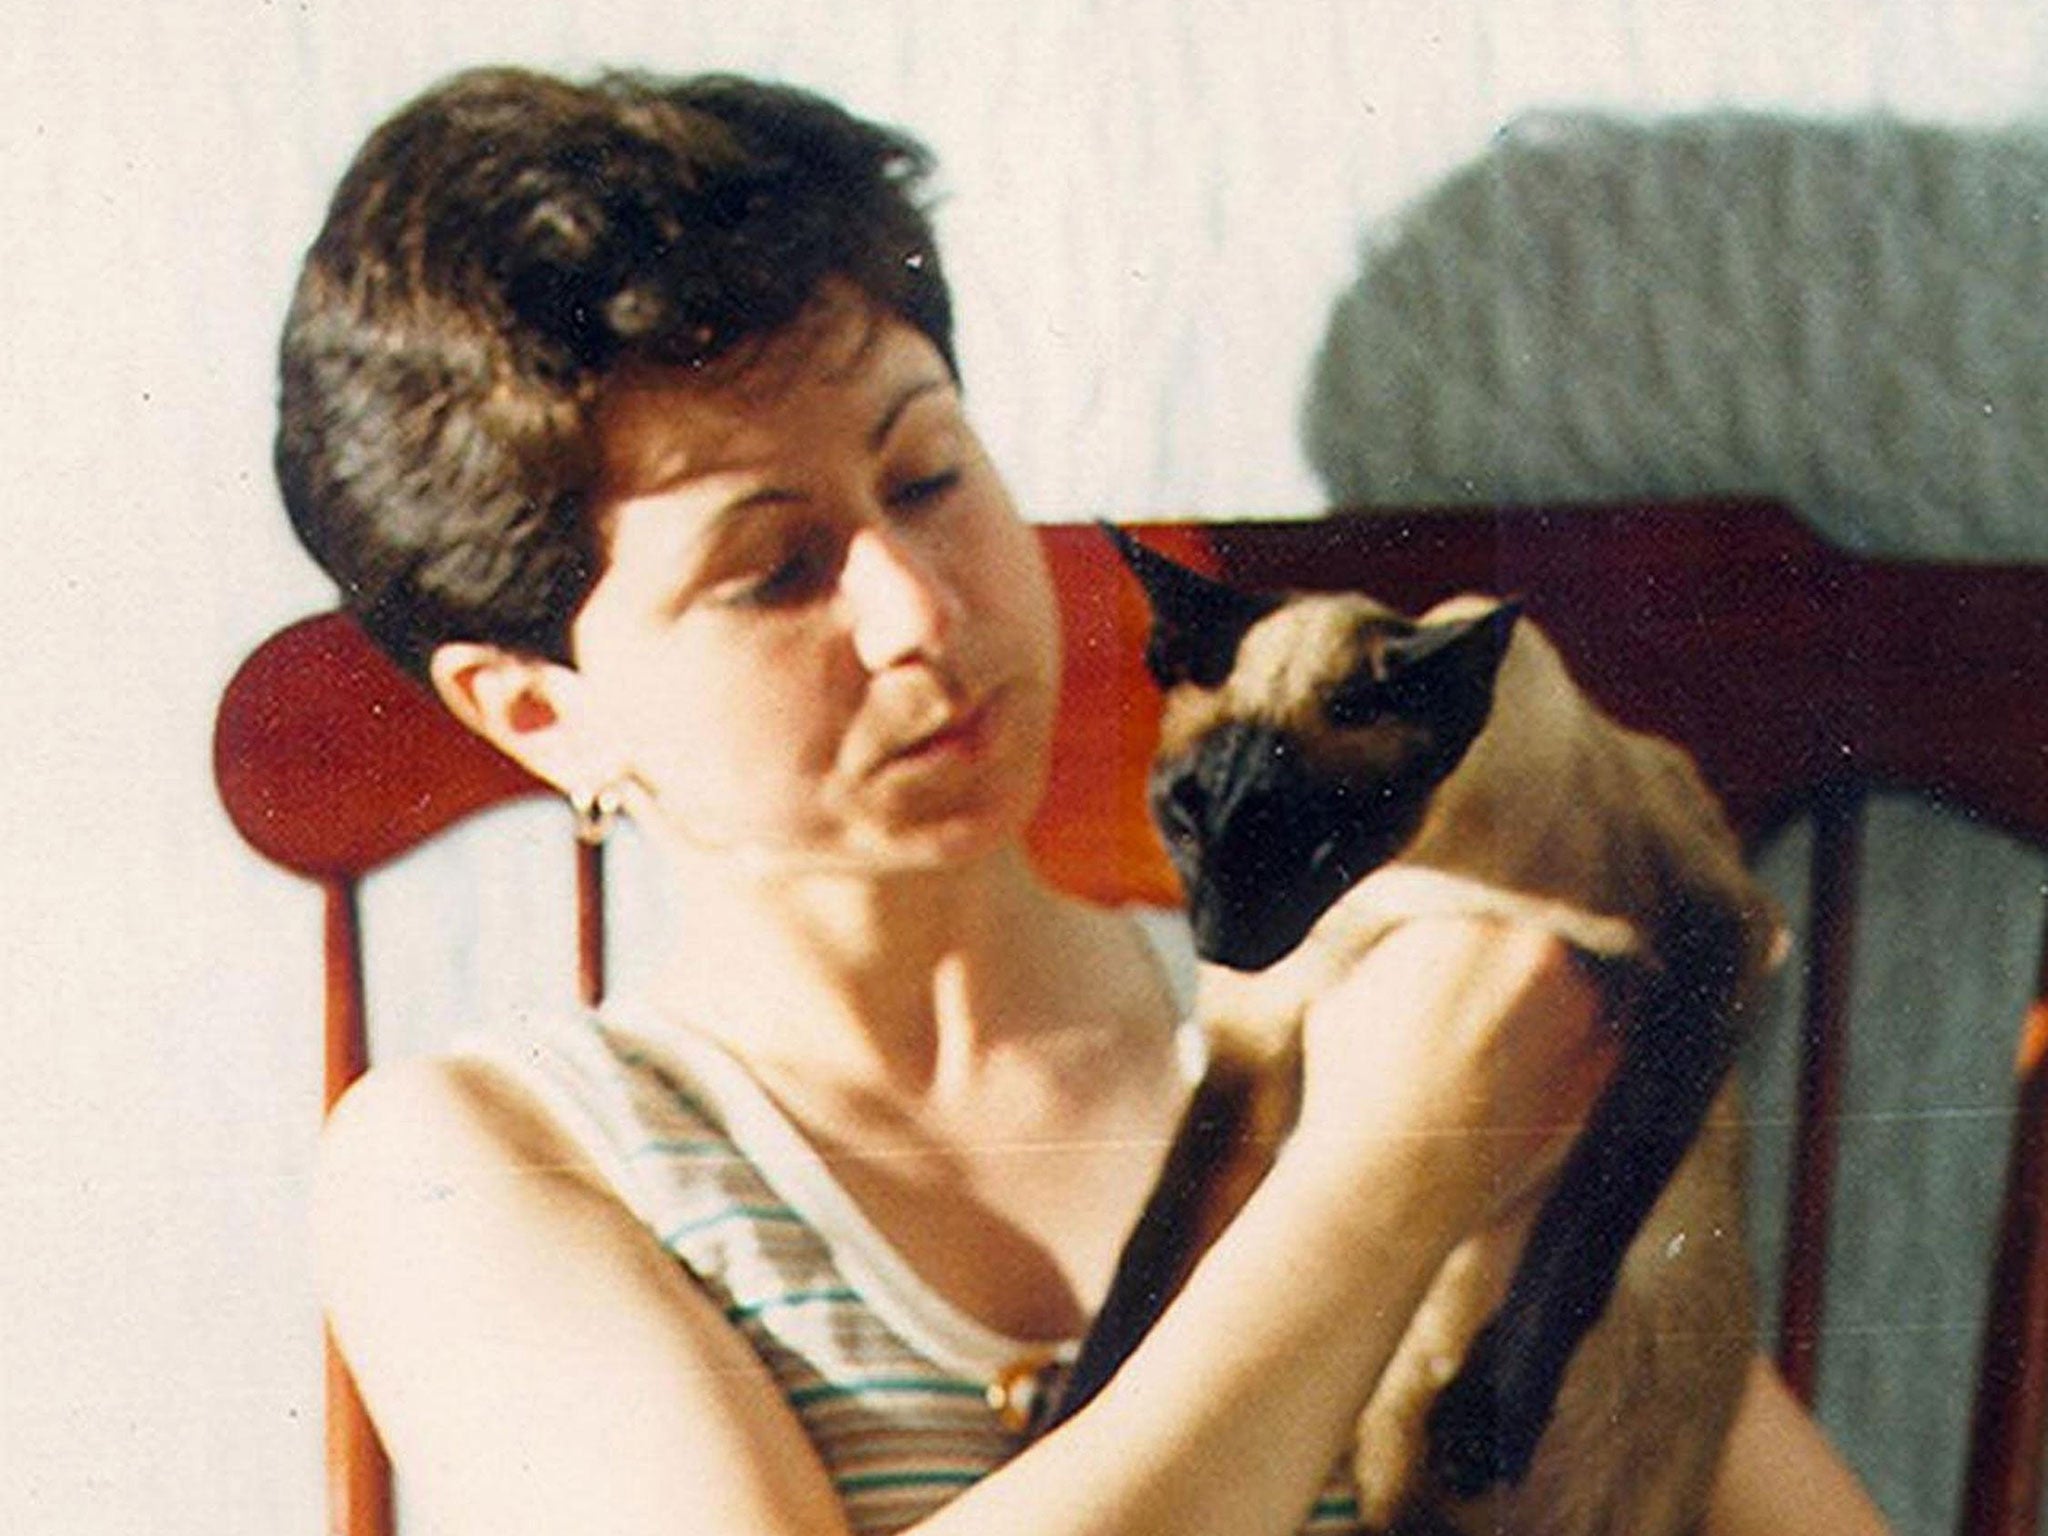 Lyn Bryant was murdered as she walked her family dog near her home in Ruan High Lanes, Cornwall, in October 1998